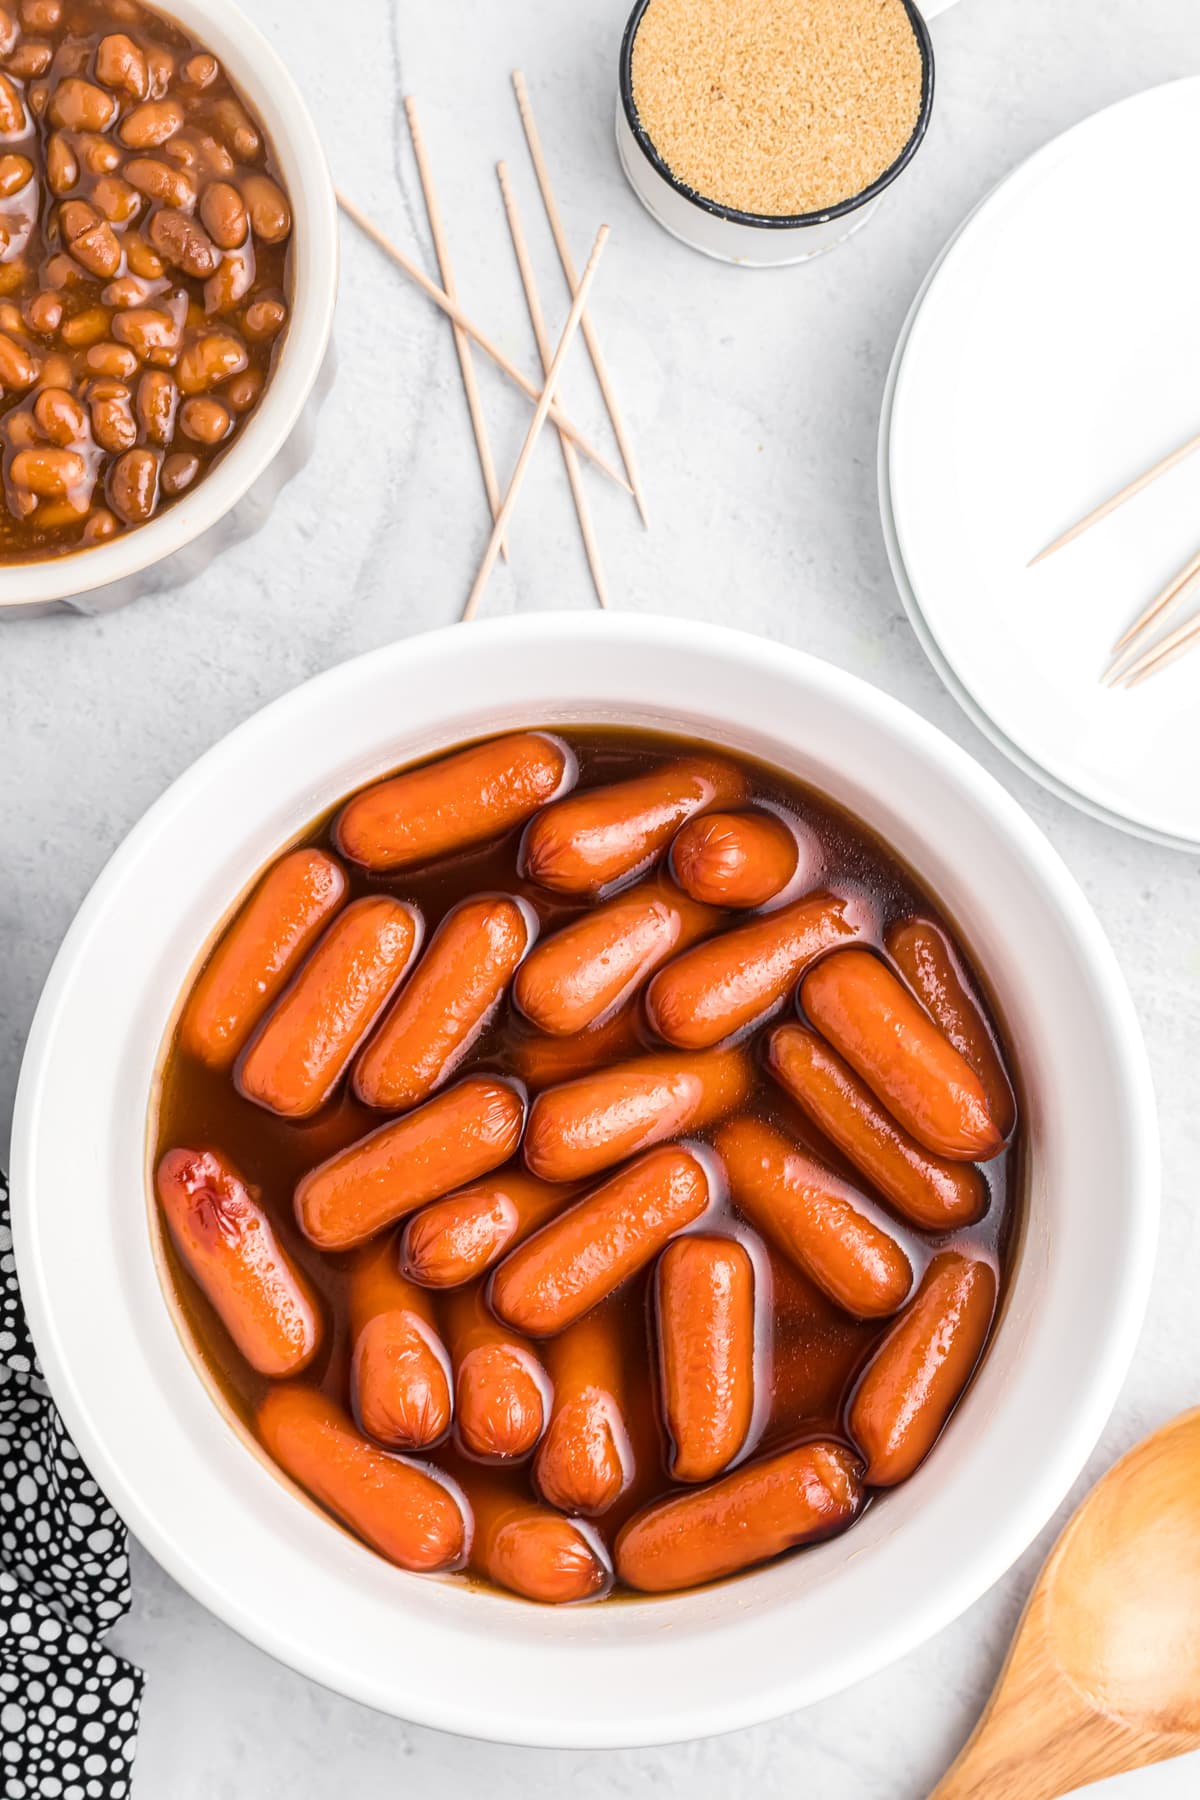 Beanie weenies served with beans and toothpicks.